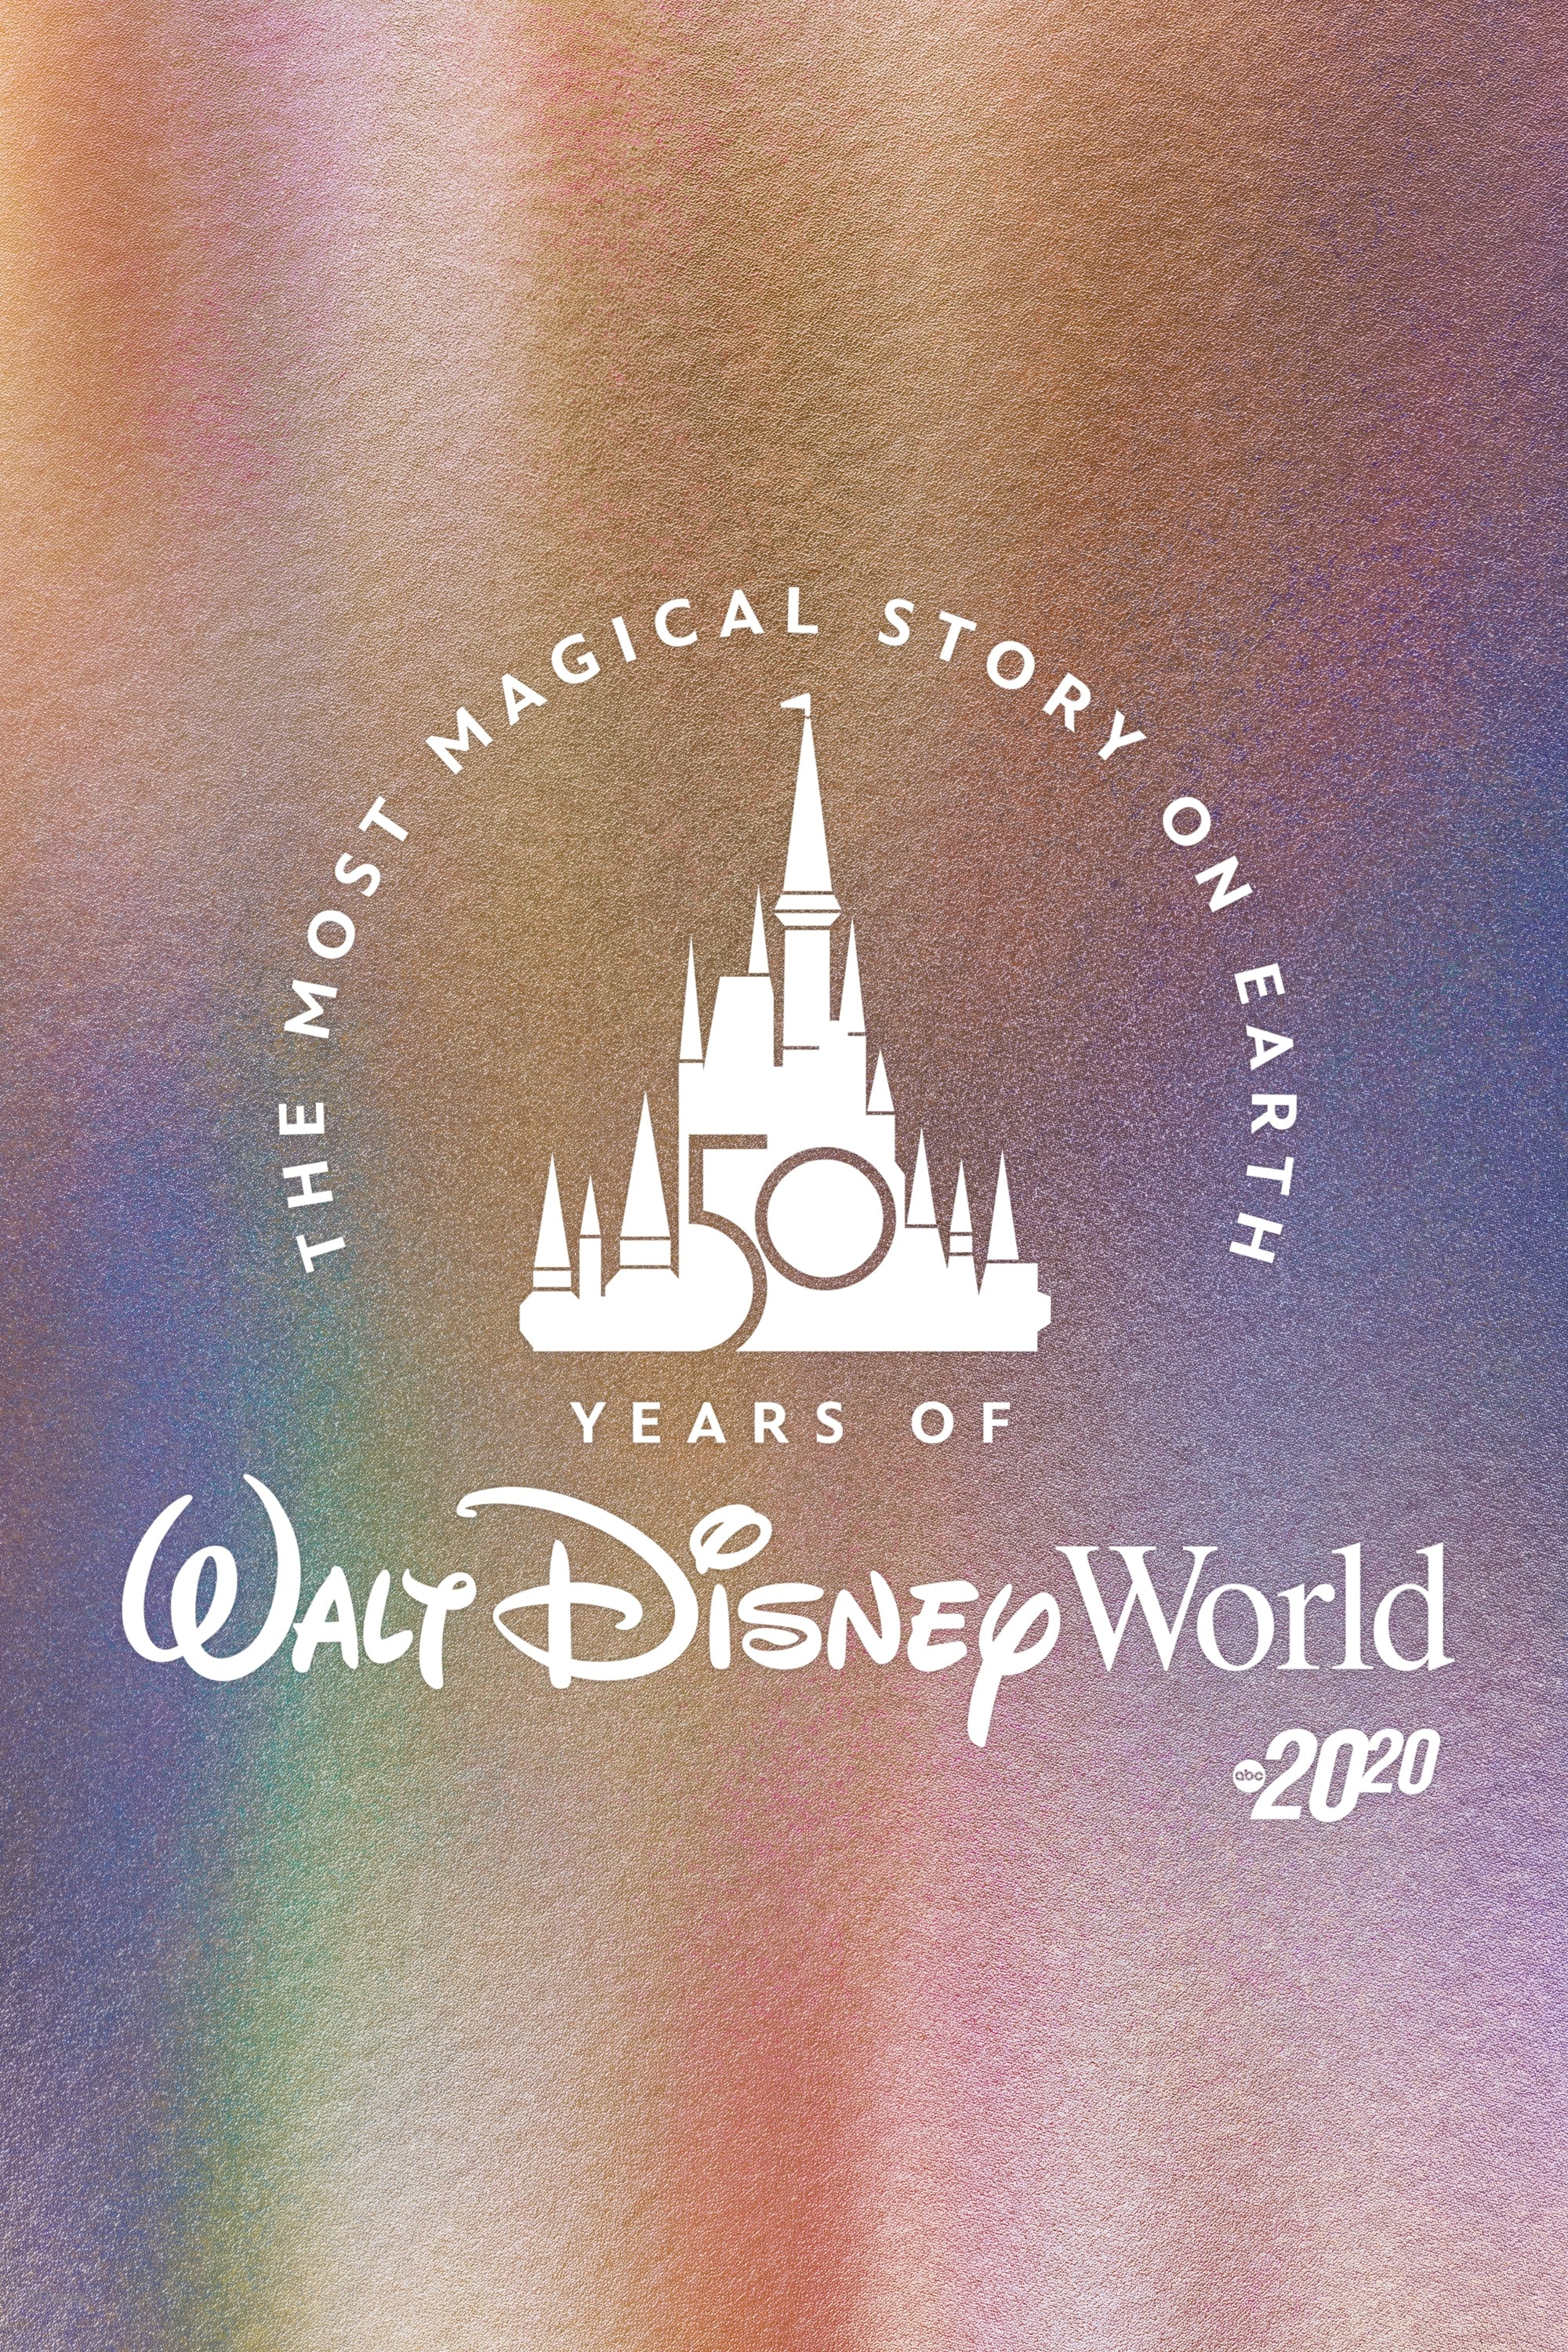 The Most Magical Story on Earth: 50 Years of Walt Disney World (2021)